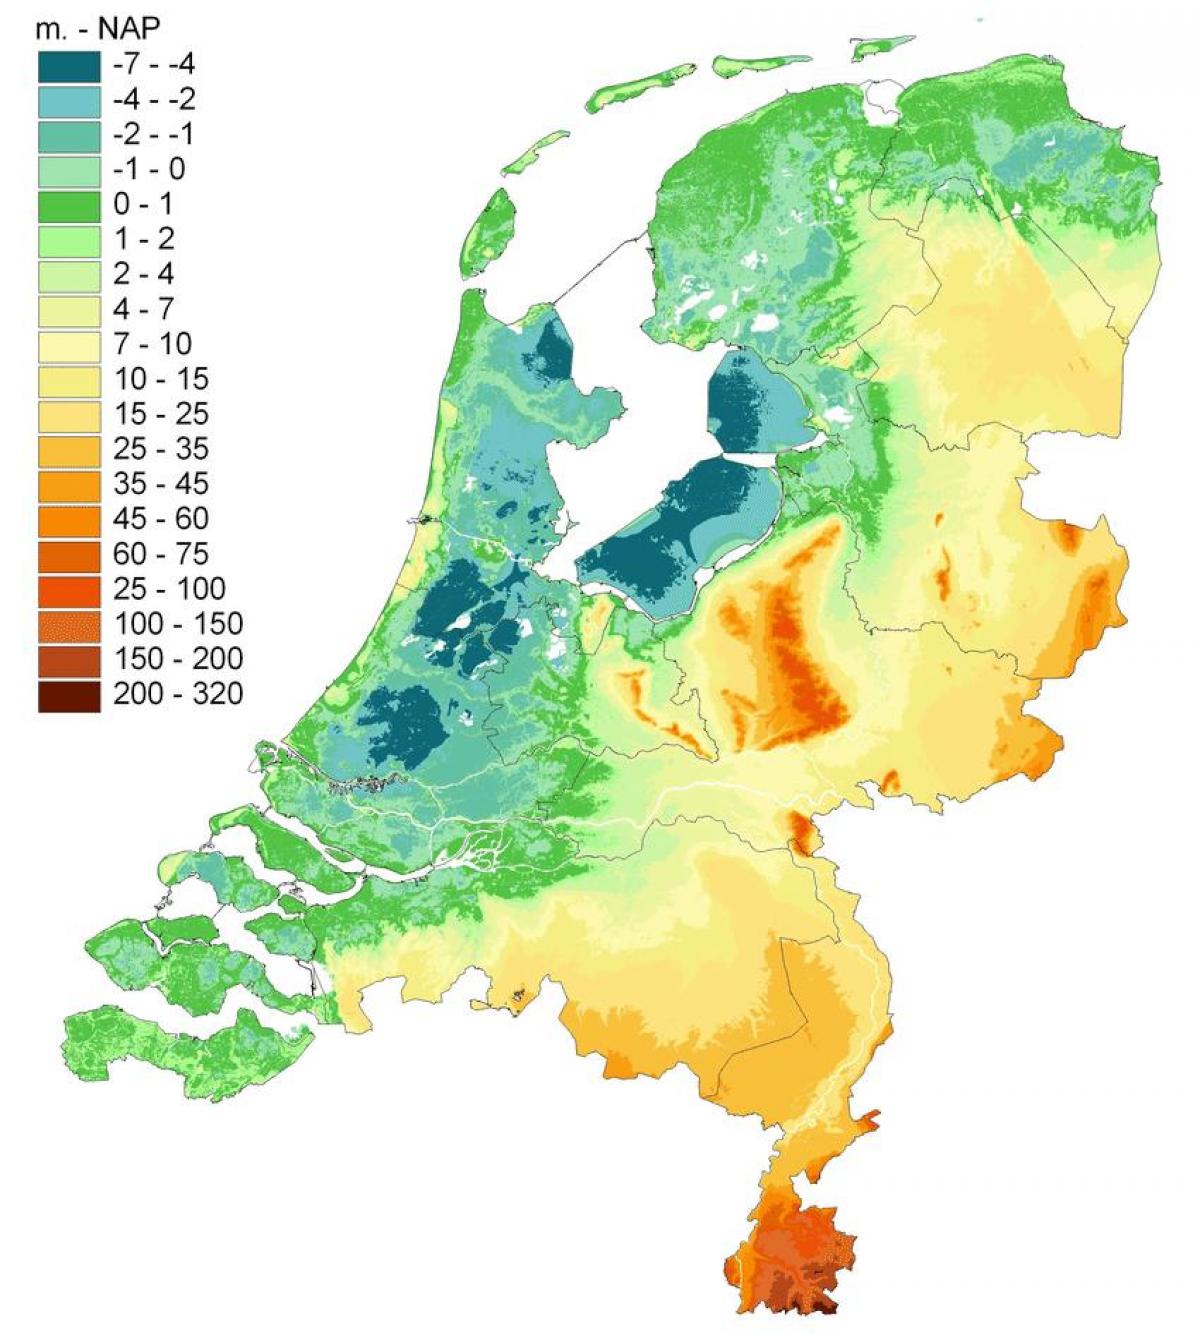 Topographical map of Netherlands